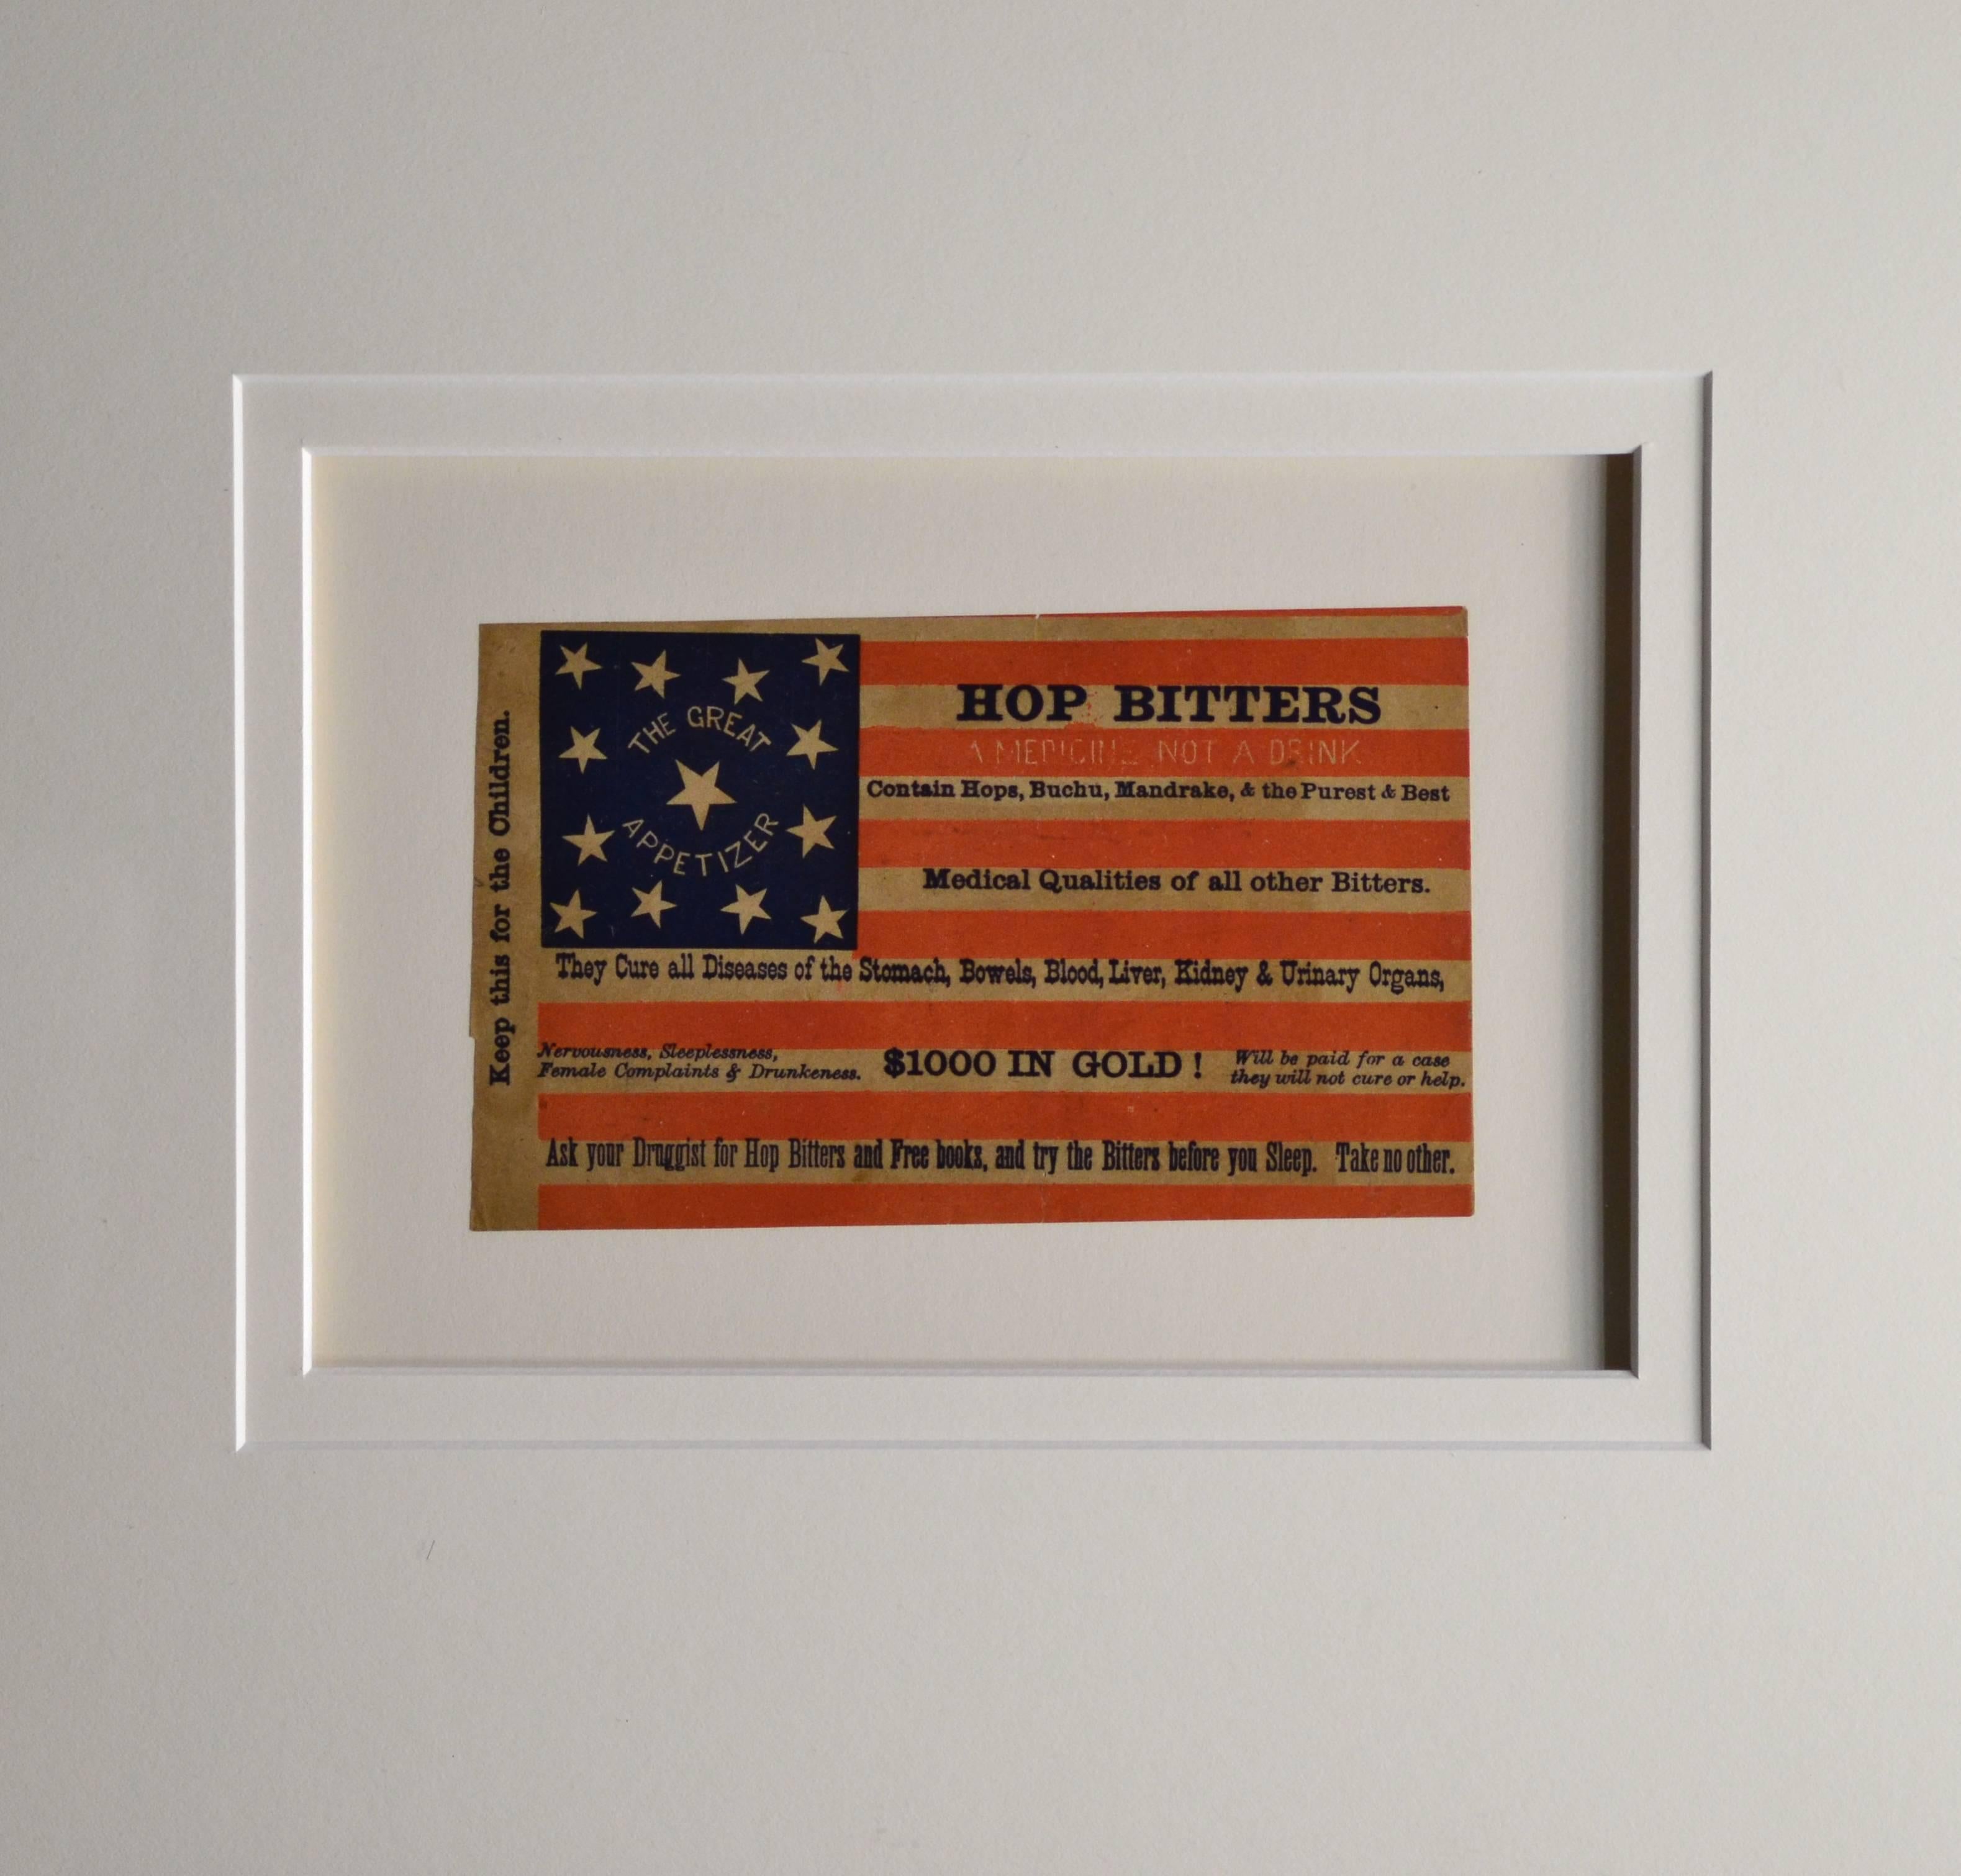 Antique 13 Star Hop Bitters Advertising card. The flag on the card has a very rare star arrangement. Printed on a tick paper that has turned brownish, hand trimmed. The frame is 15.5" x 20" The card is 4.5" x 7" These ere used